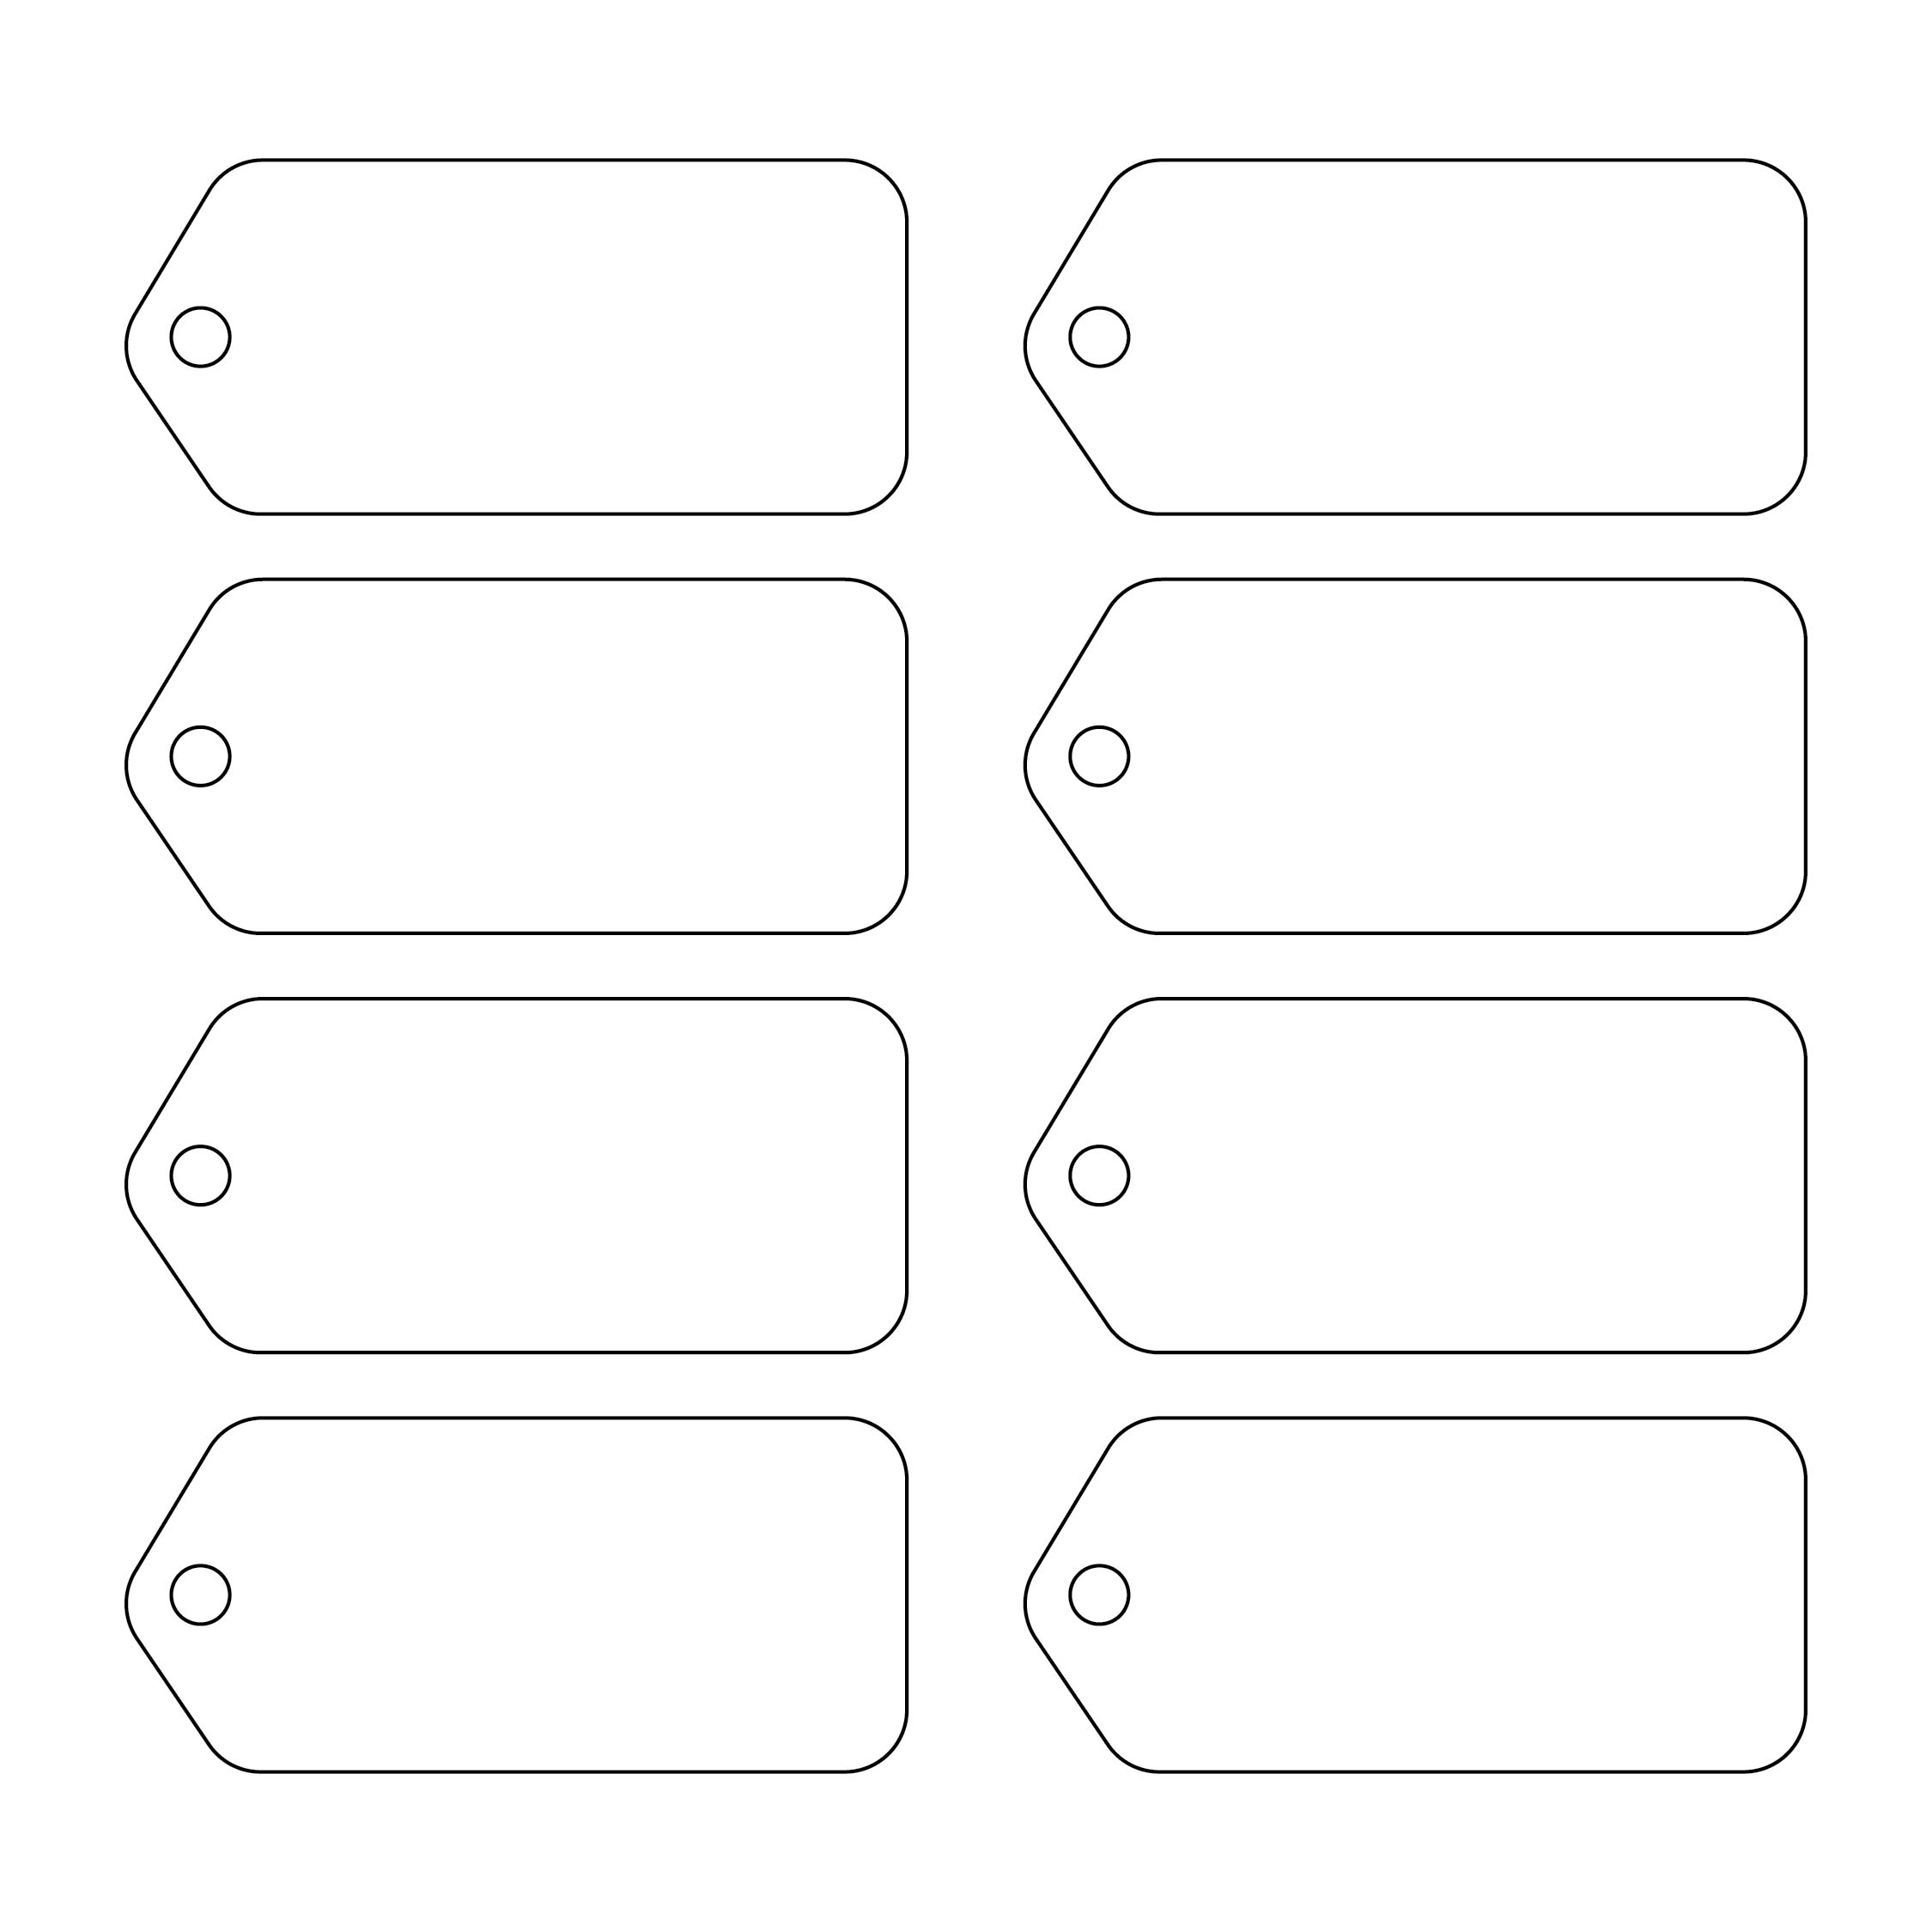 8 Best Images of Free Printable Template For Gift Tags - Free Printable